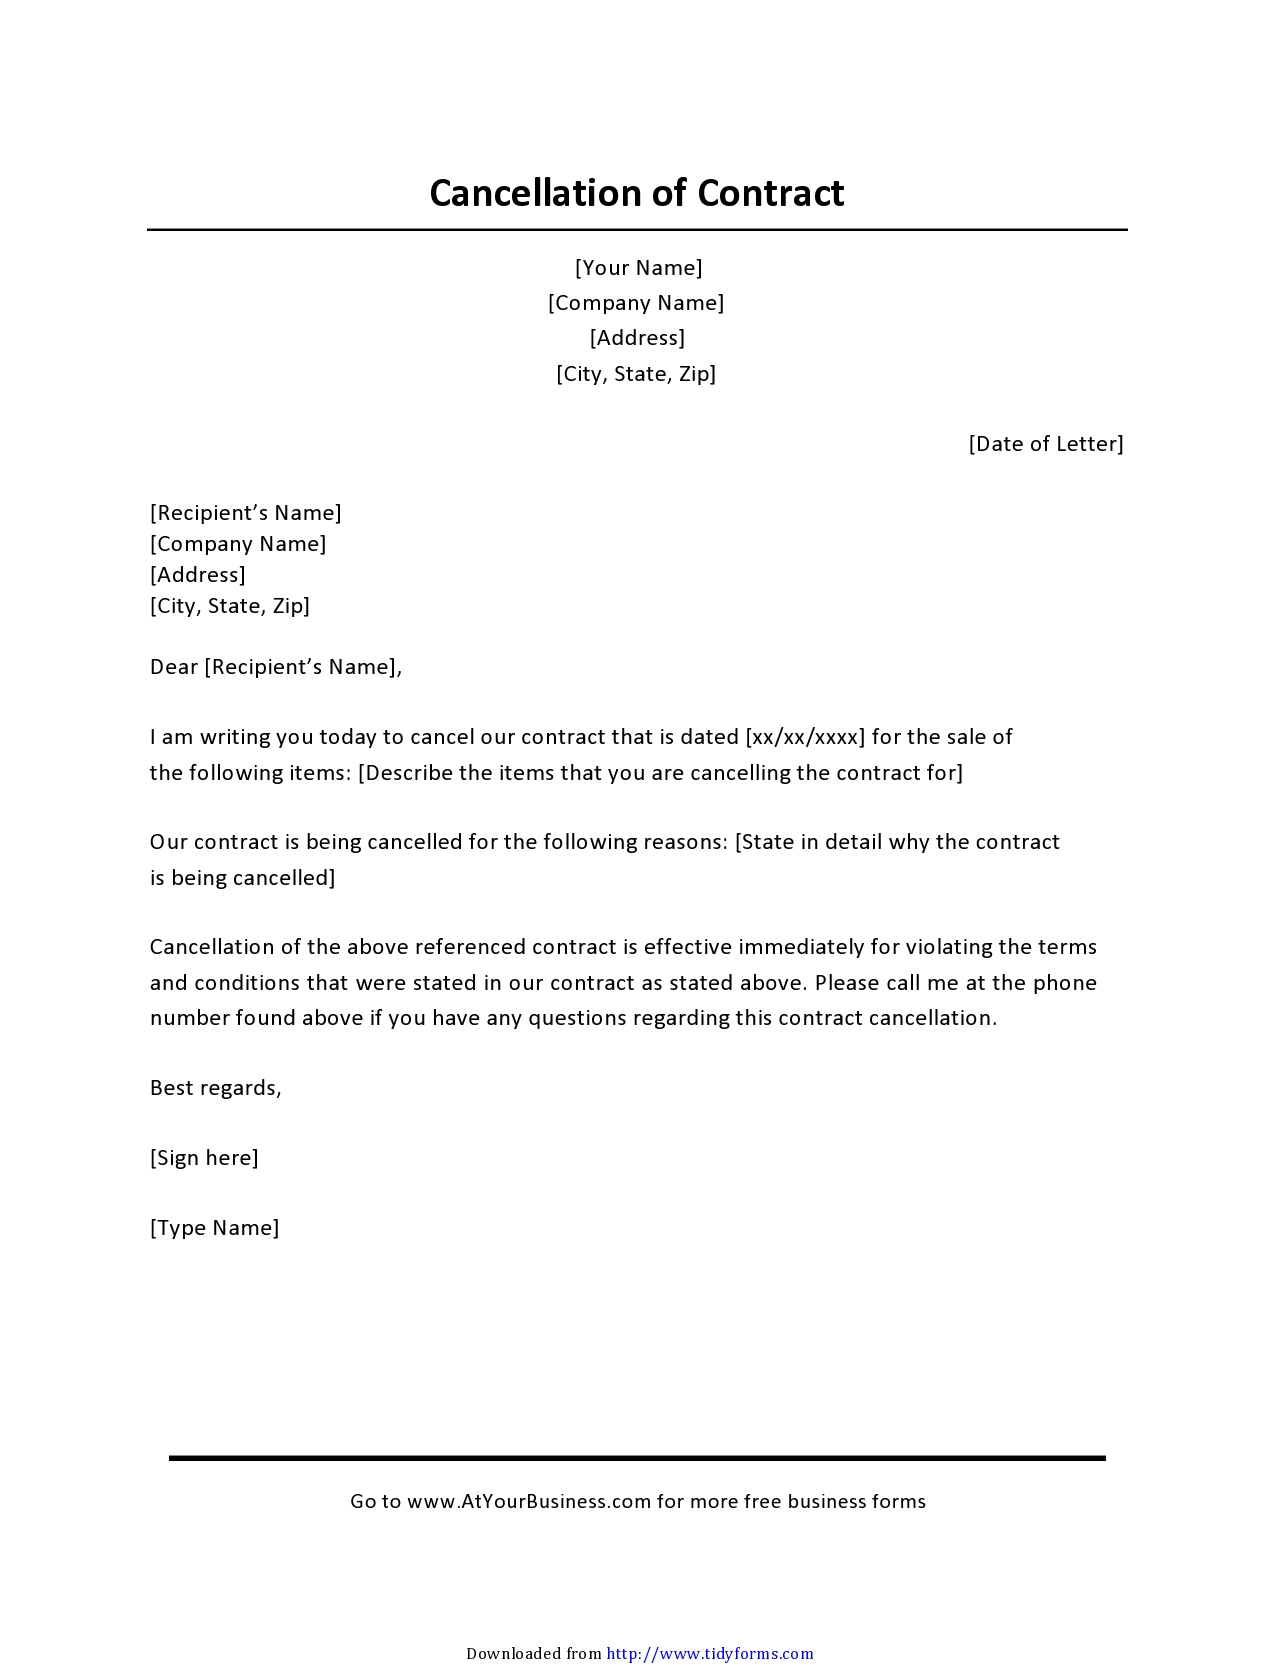 Free contract termination letter 24